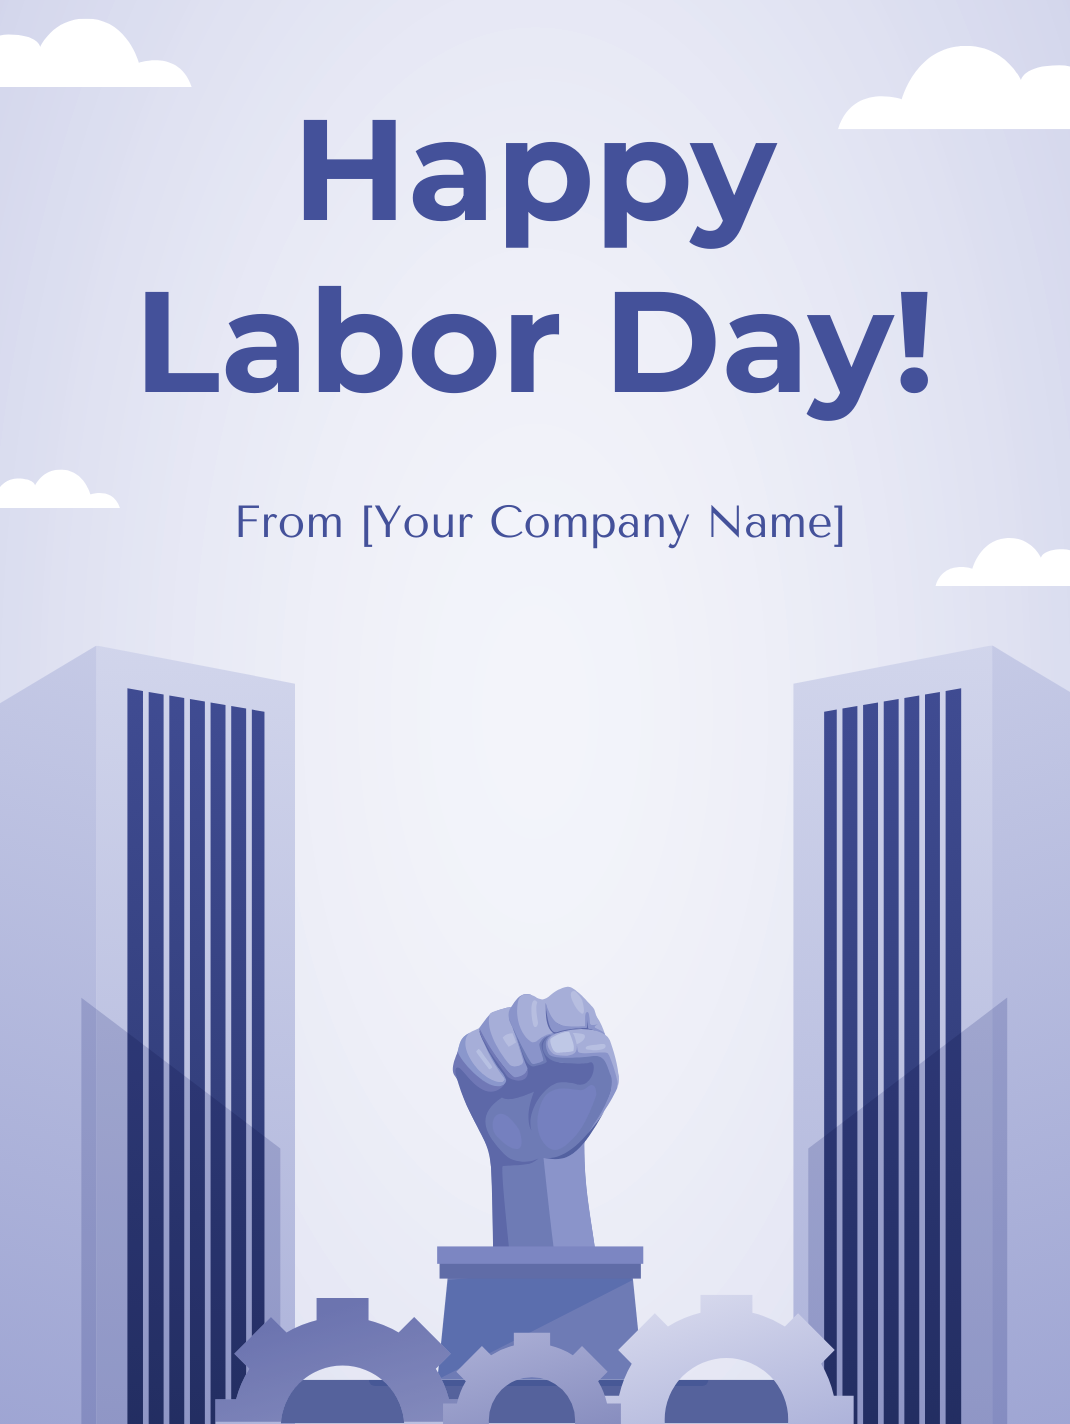 Labour Day Post Template